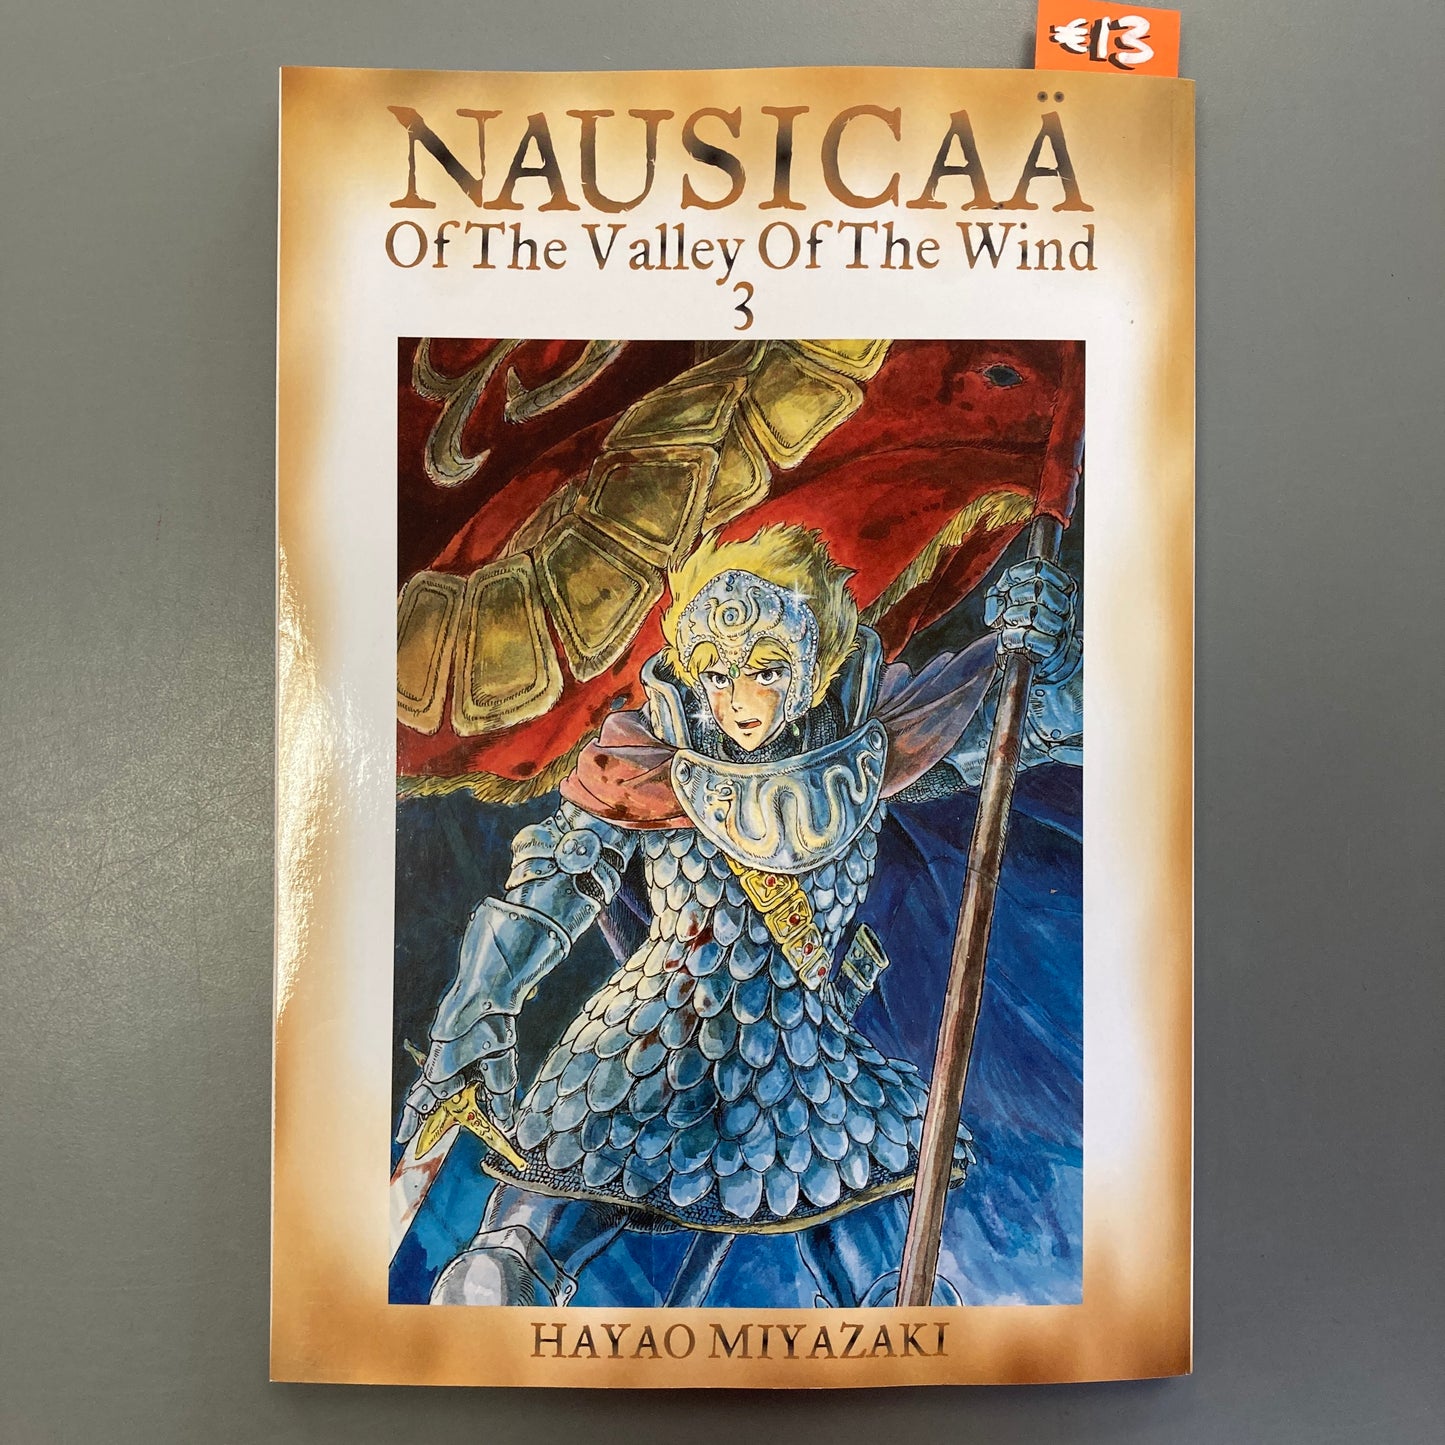 Nausicaä of the Valley of the Wind, 3